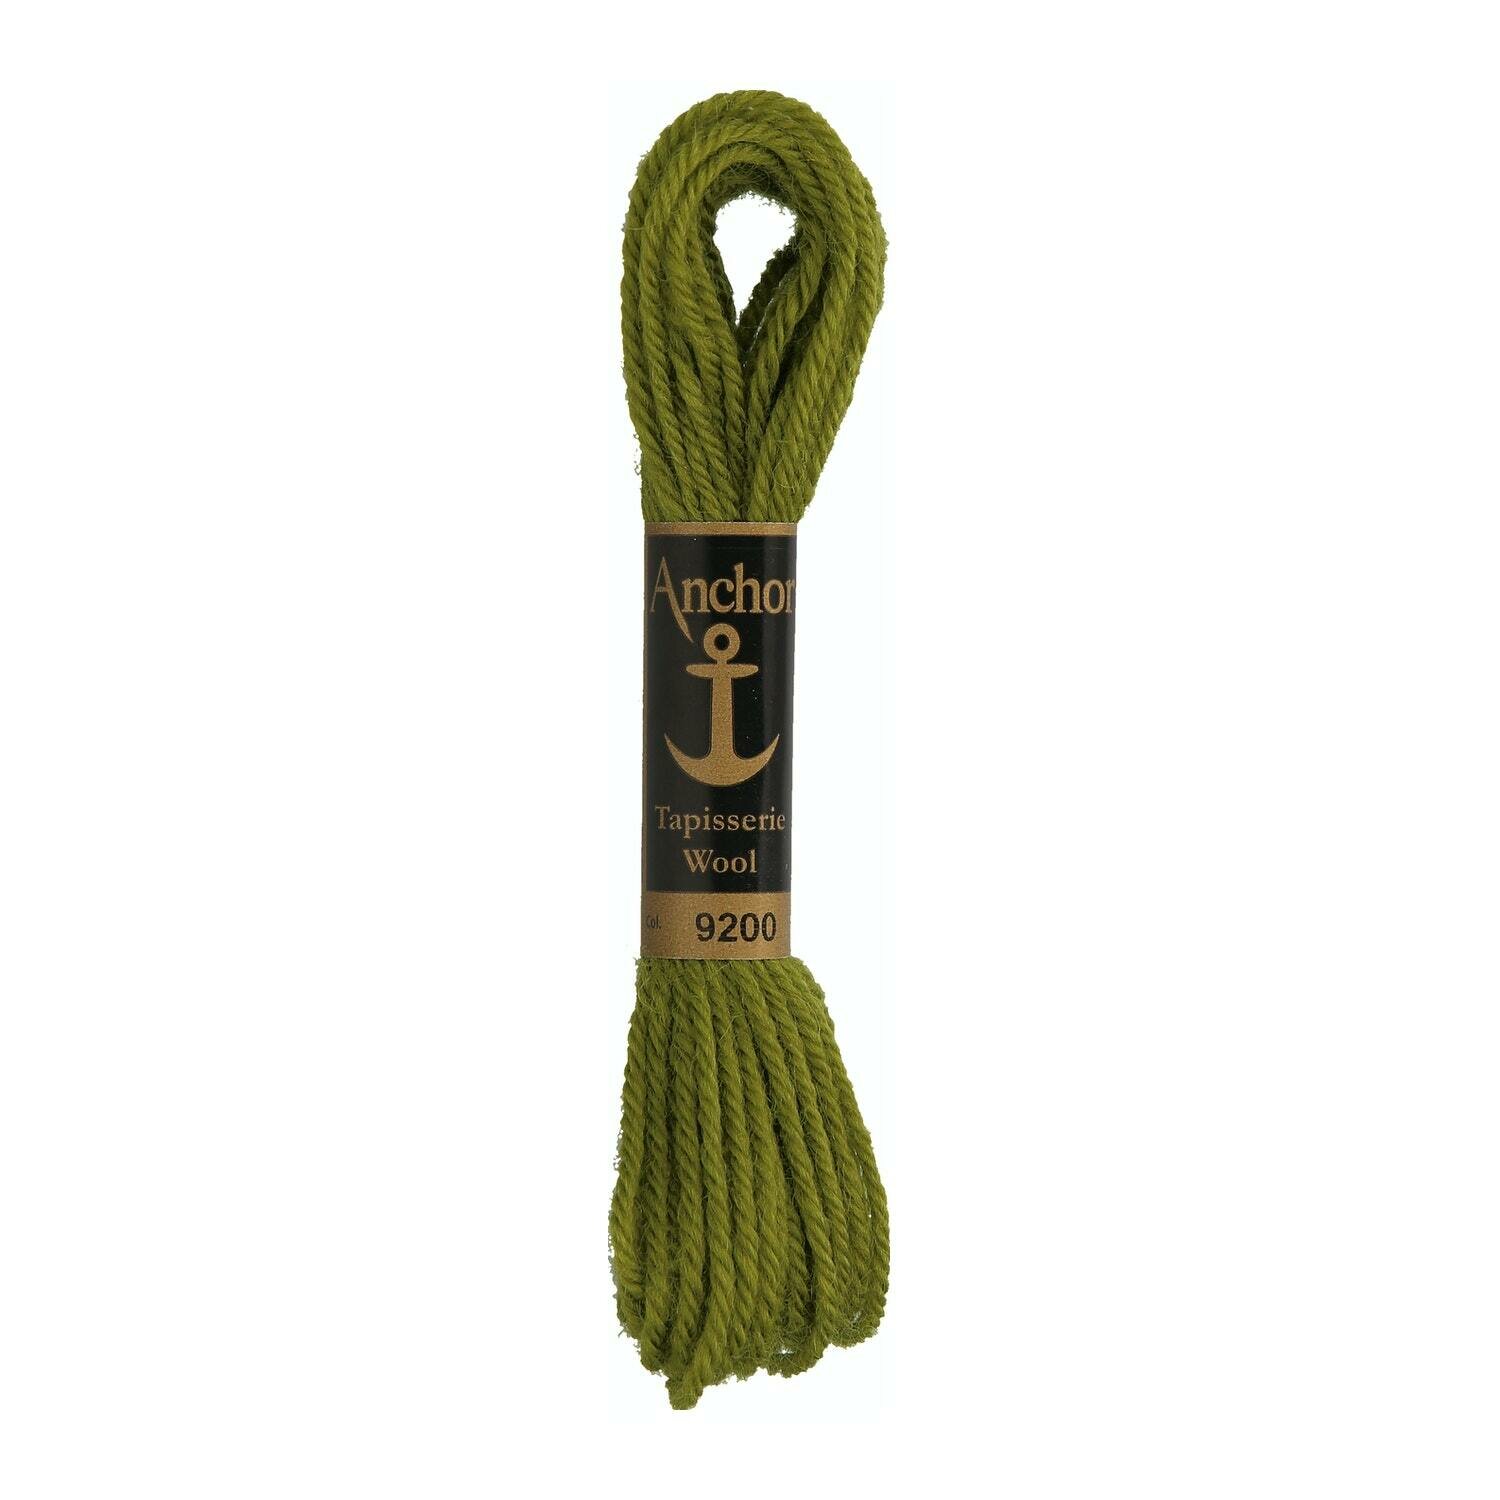 Anchor Tapisserie Wool # 09200